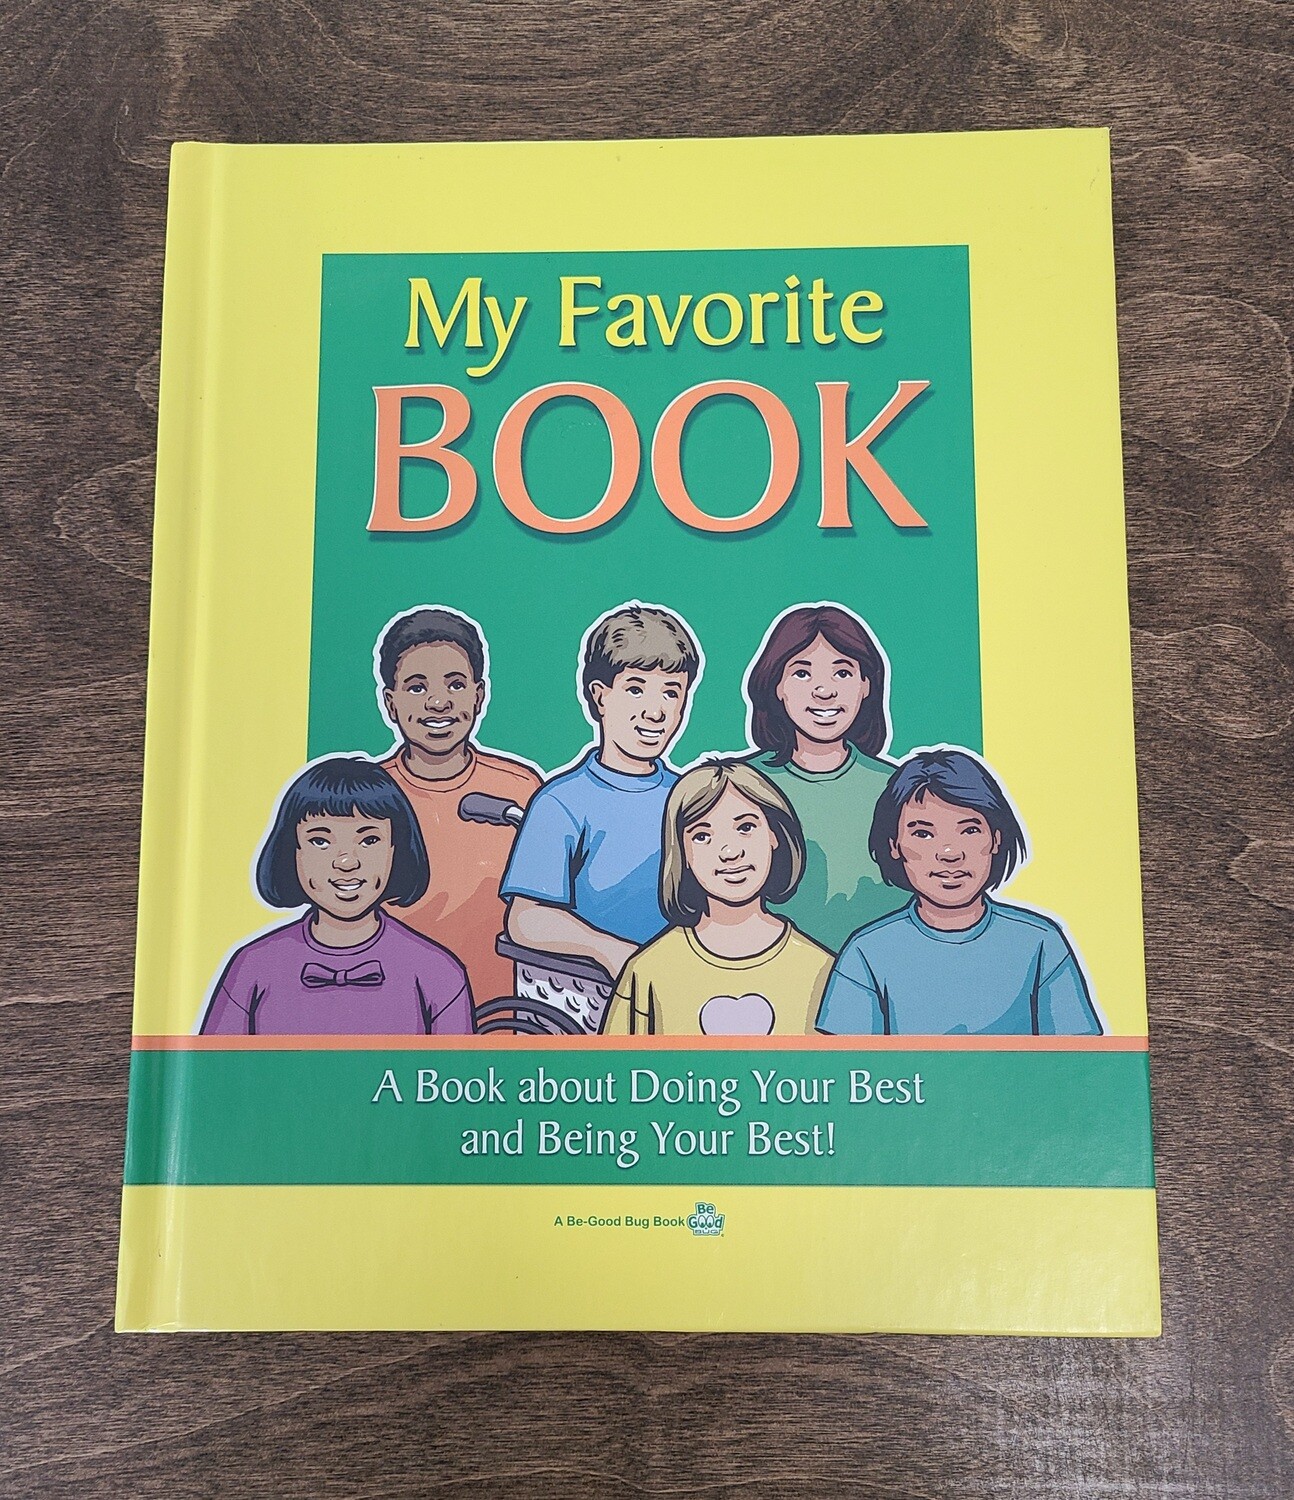 My Favorite Book: A Book about Doing Your Best and Being Your Best! by Dan Seufert and Pamela Gabbard